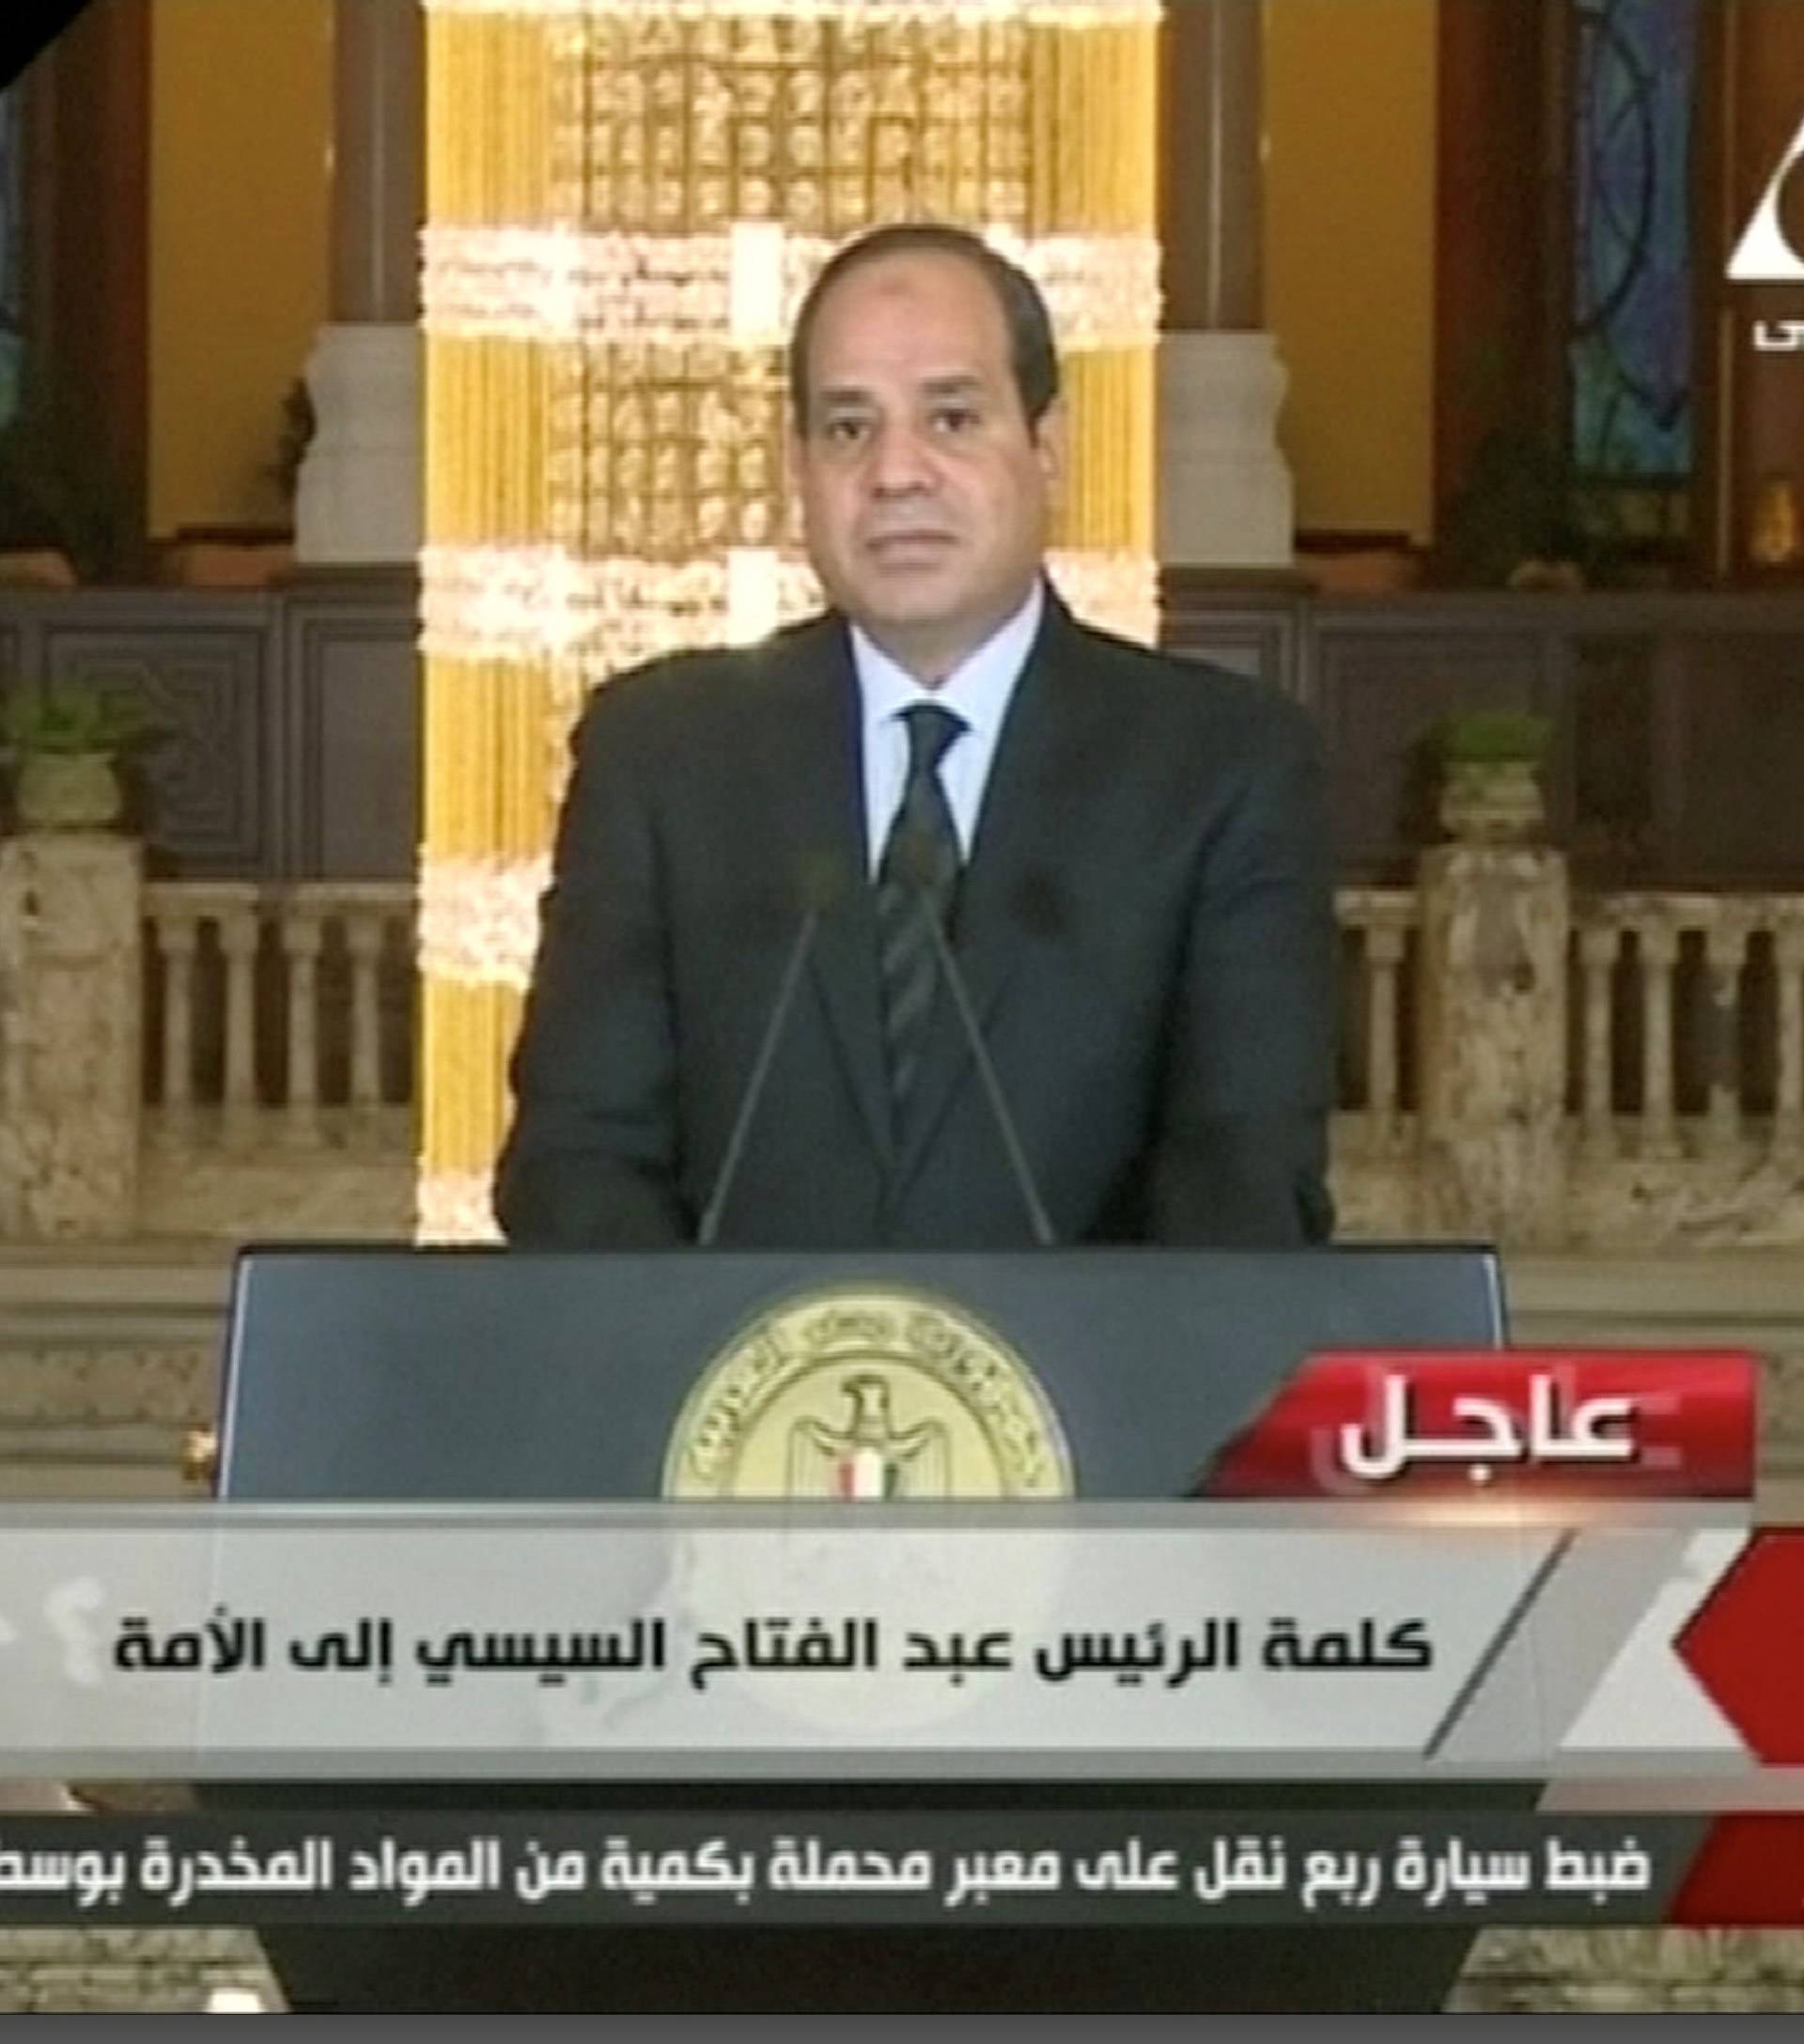 Egyptian President Abdel Fattah Al Sisi gives a televised statement on the attack in North Sinai, in Cairo